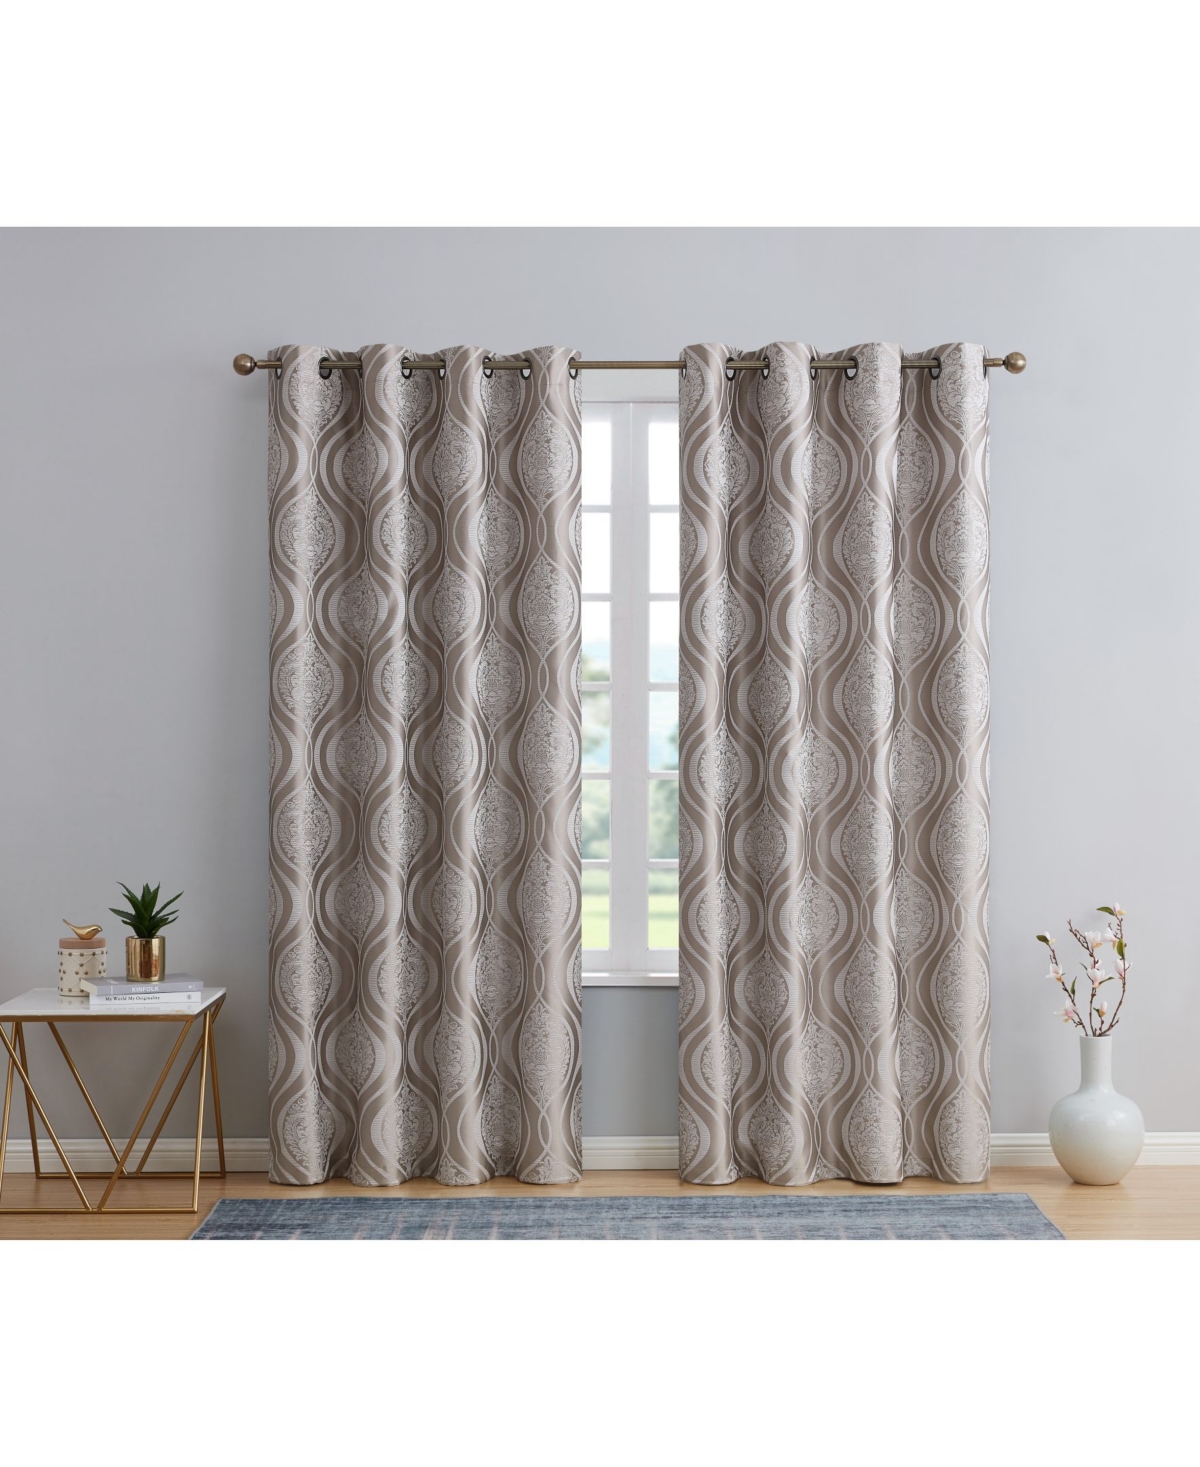 Montero Damask 100% Complete Blackout Shading Thermal Insulated Energy Efficient Heat/Cold Blocking Grommet Heavy Curtain Drapery Panels for Li